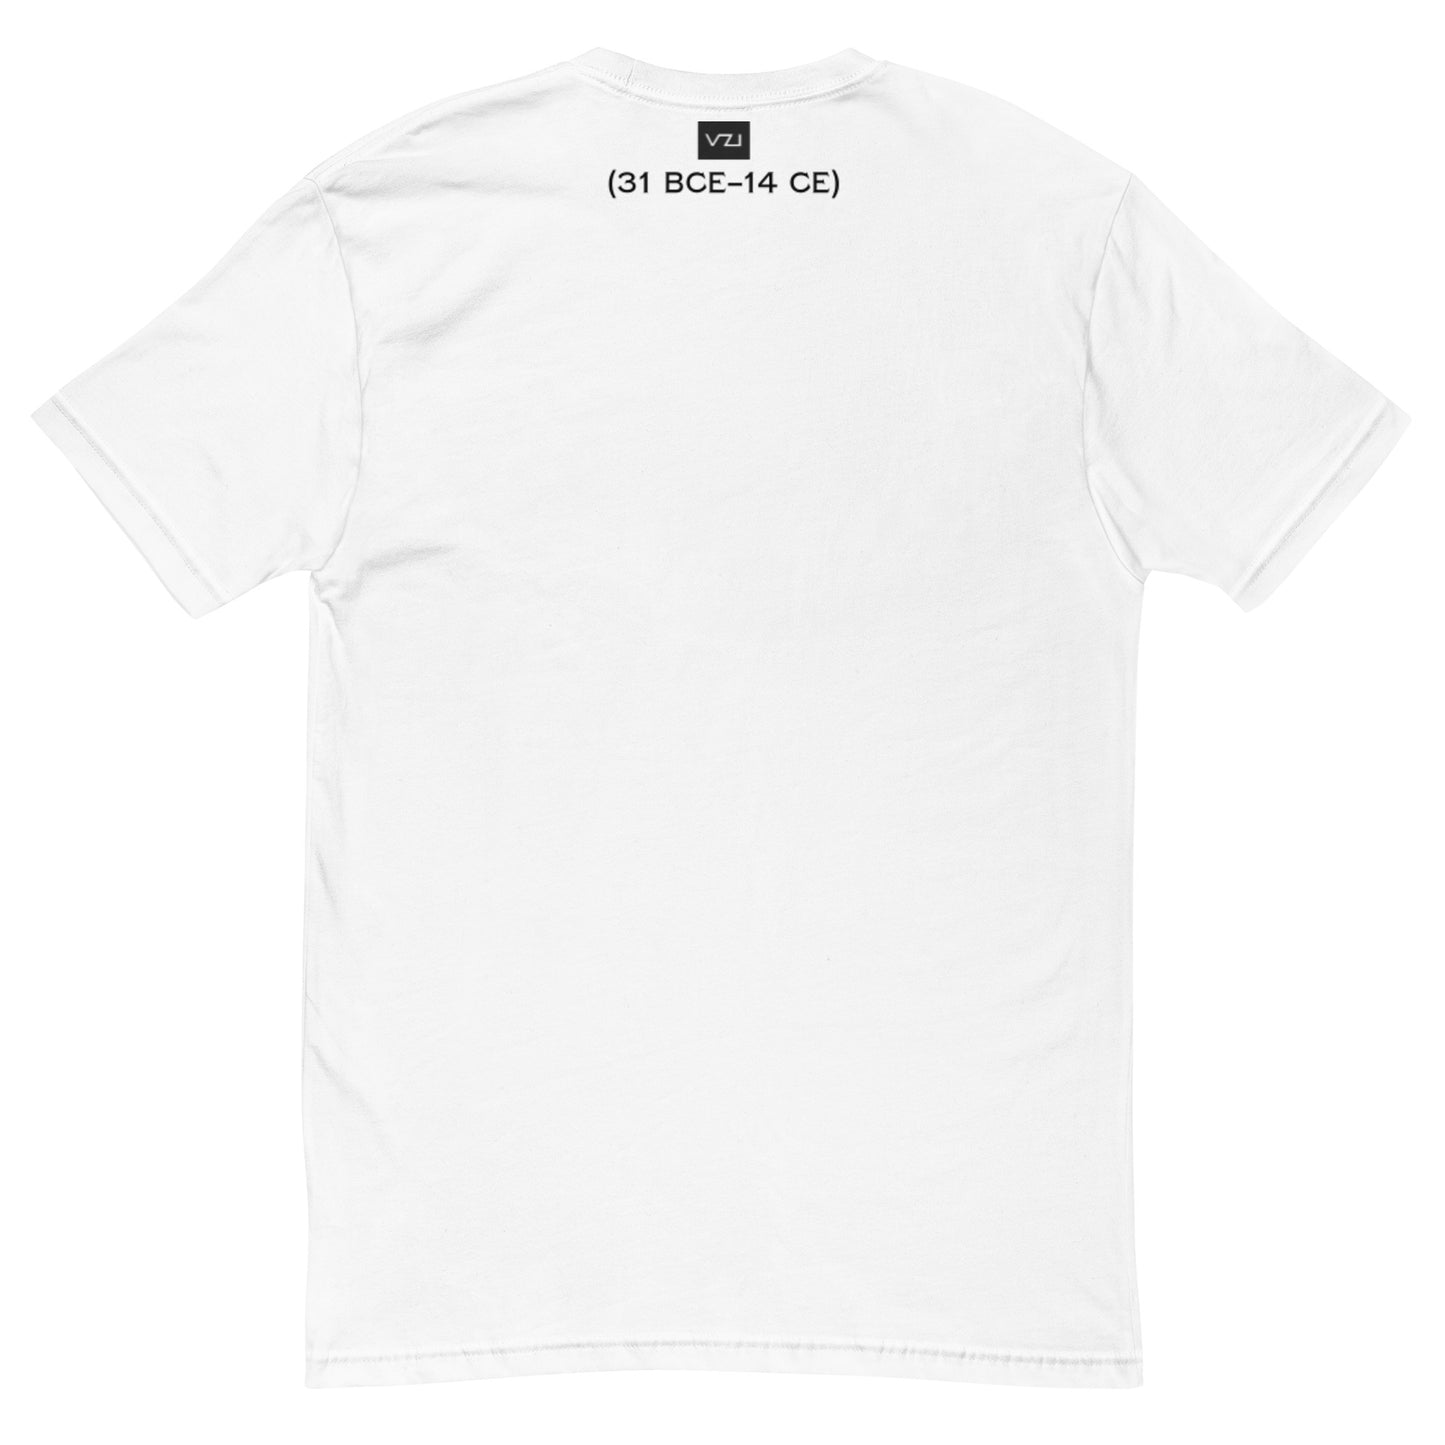 Vazzari Couture Milano: Men's Fitted T-Shirt:  Augustus (31 bce–14 ce) Smart Casual, Comfort Fit, Soft